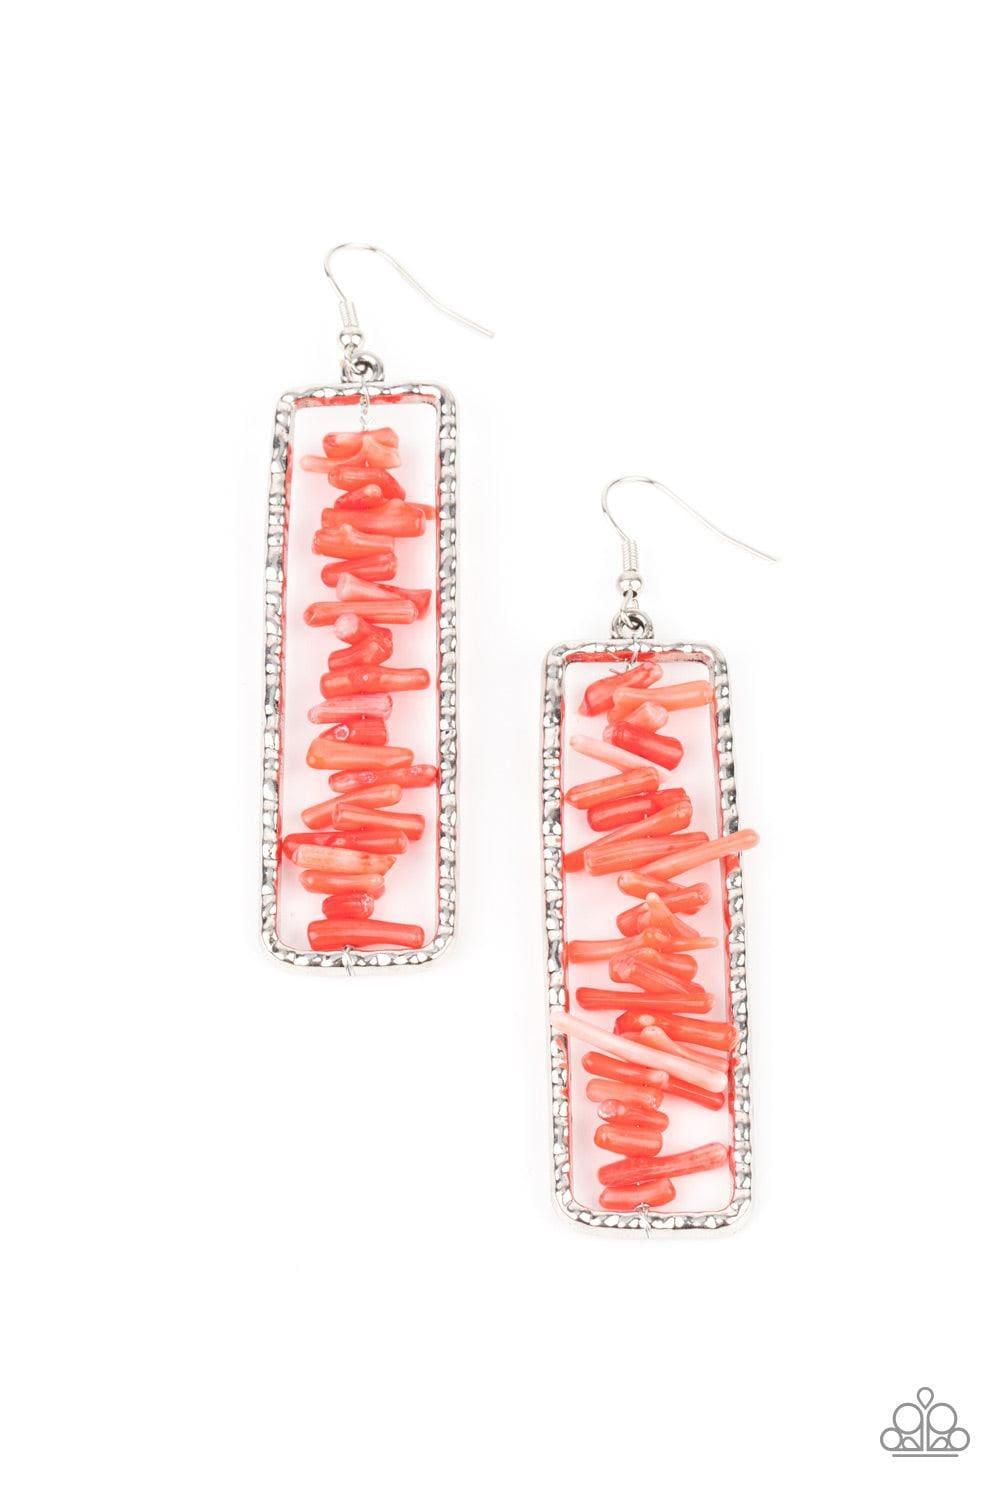 Paparazzi Accessories - Don’t Quarry, Be Happy - Red Earrings - Bling by JessieK